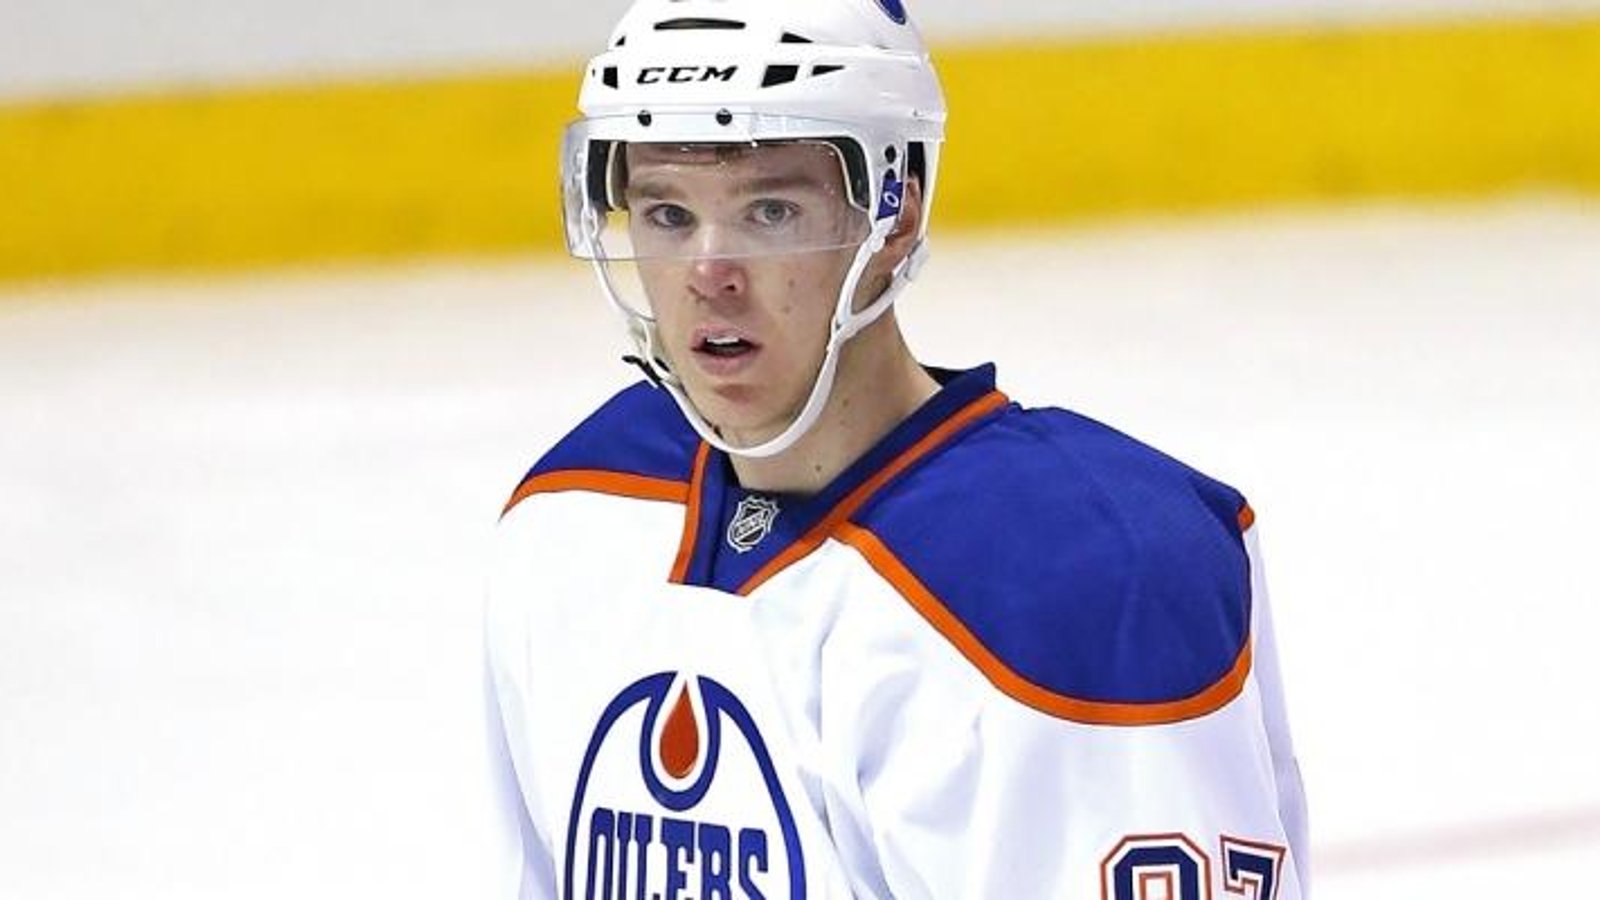 Major update on the status of Connor McDavid.